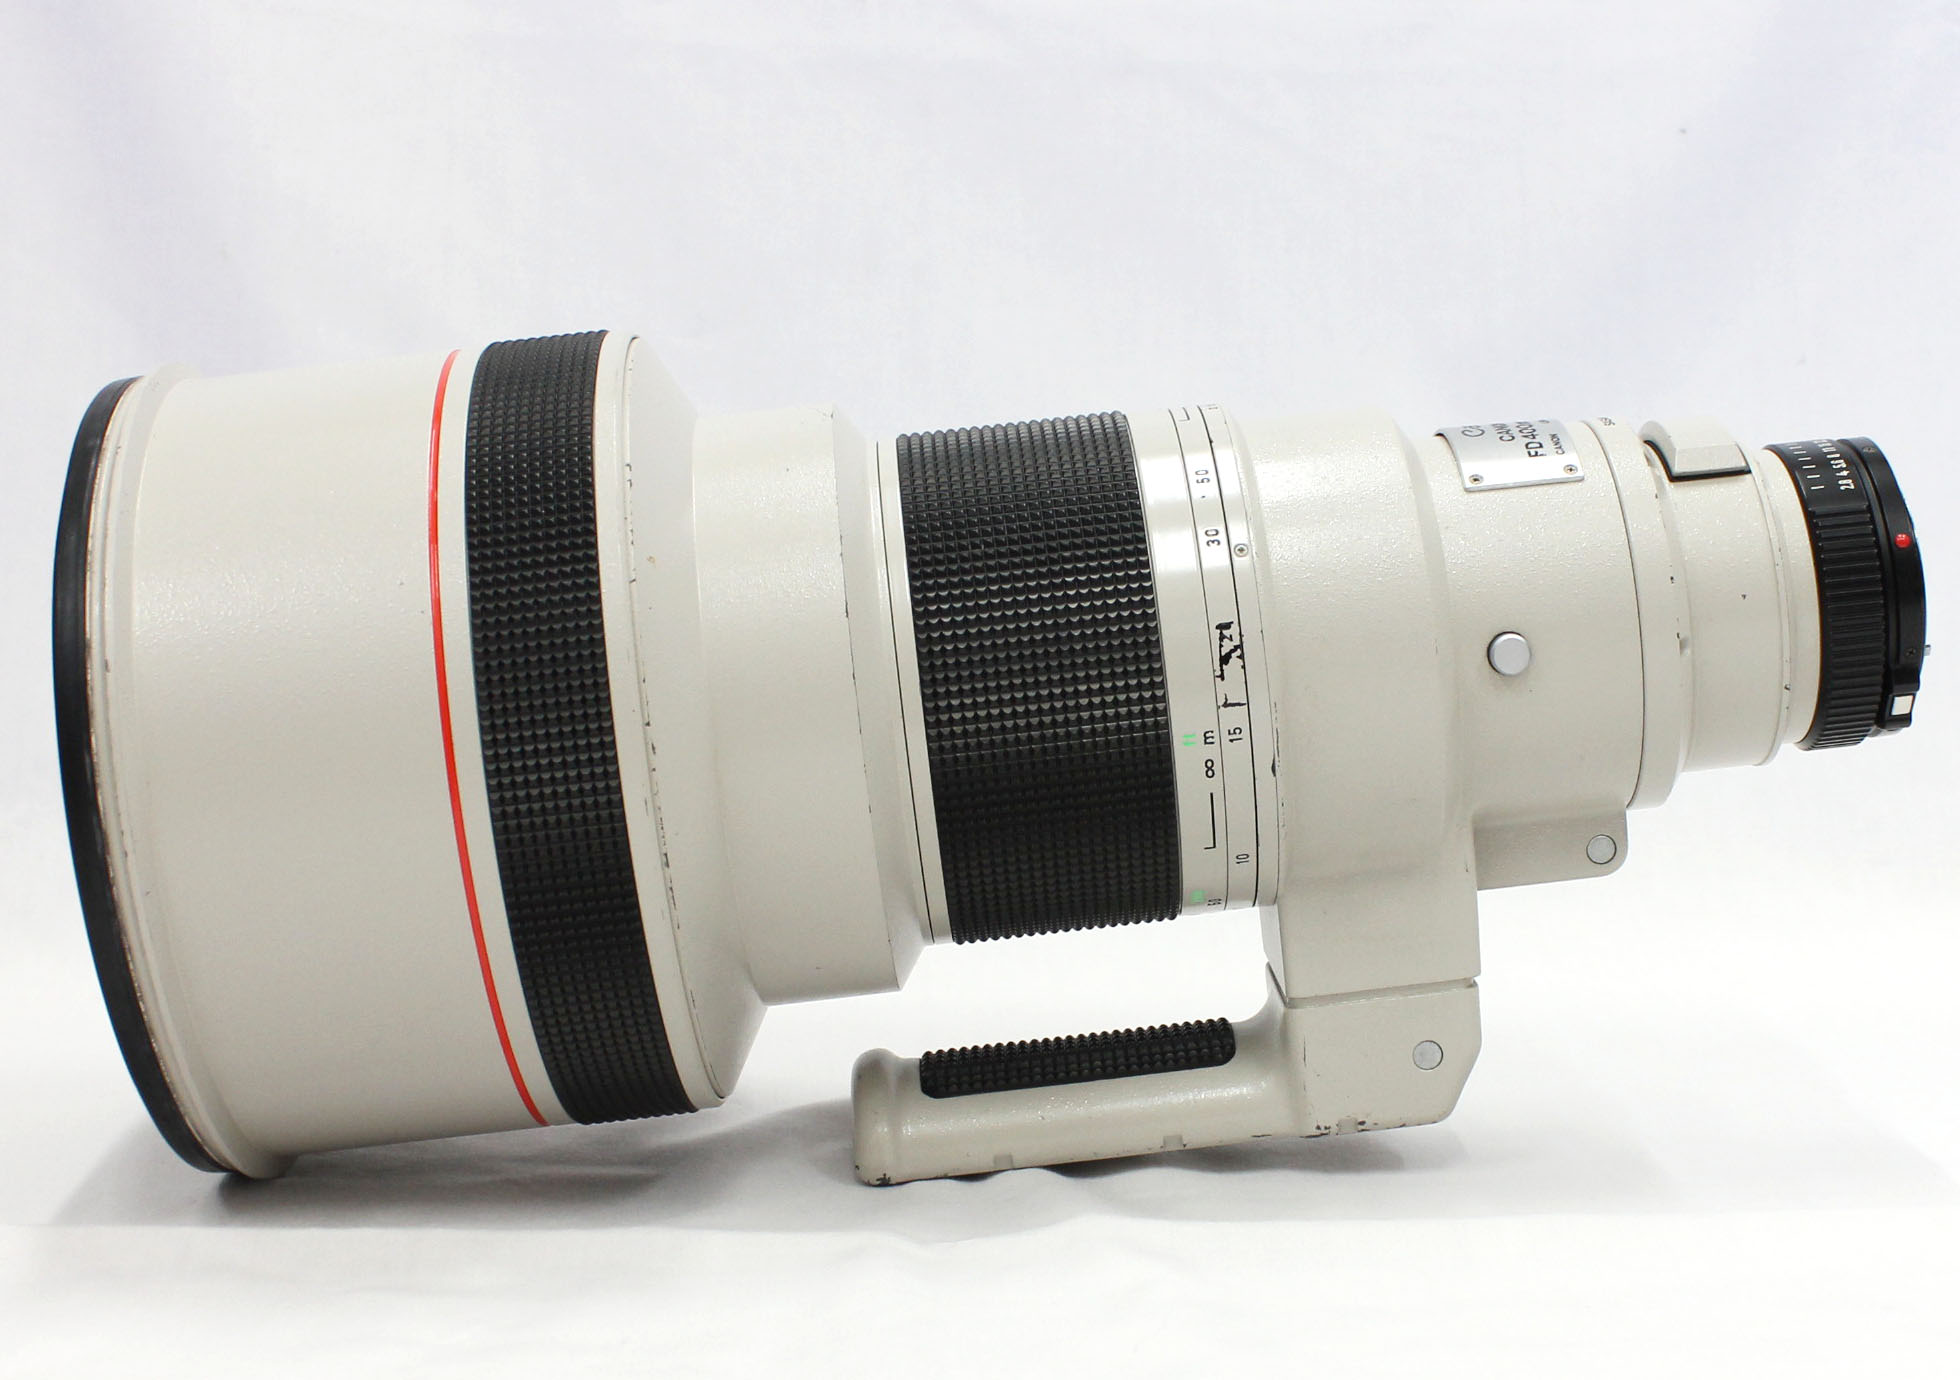  Canon New FD NFD 400mm F/2.8 L MF Telephoto Lens from Japan Photo 4